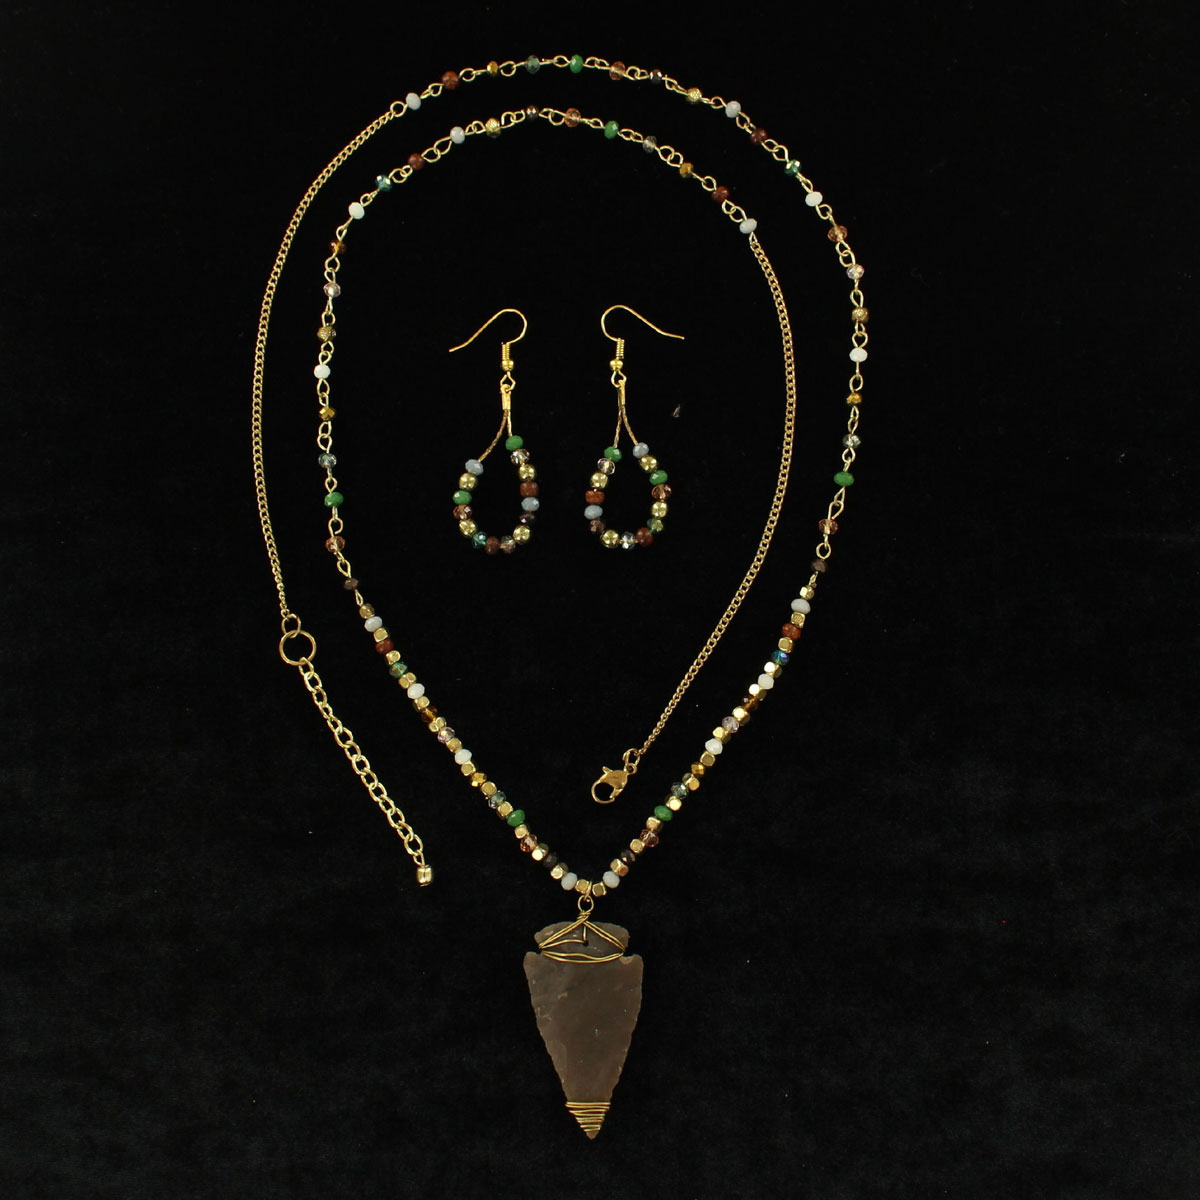 29159 Beaded Chain Arrowhead Necklace & Earrings Set - Fits 35 To 37 In.